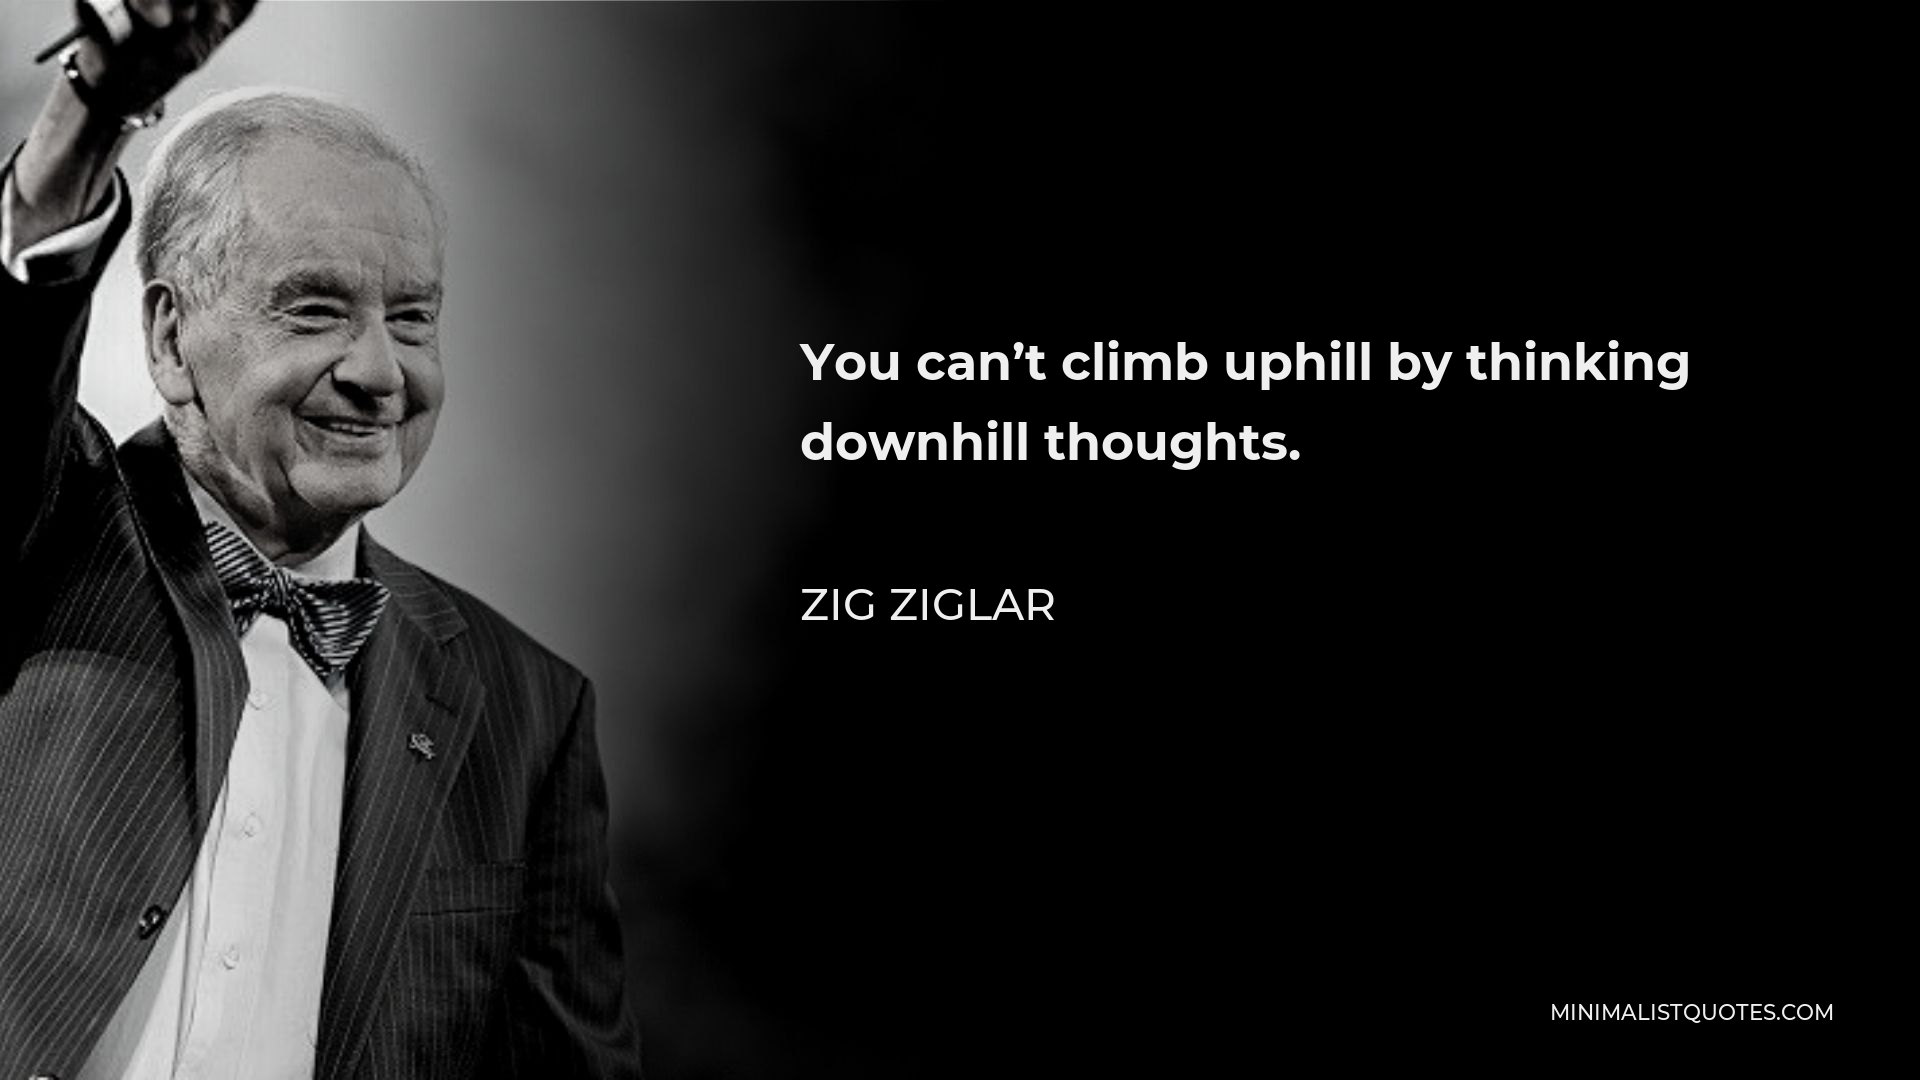 Zig Ziglar Quote - You can’t climb uphill by thinking downhill thoughts.